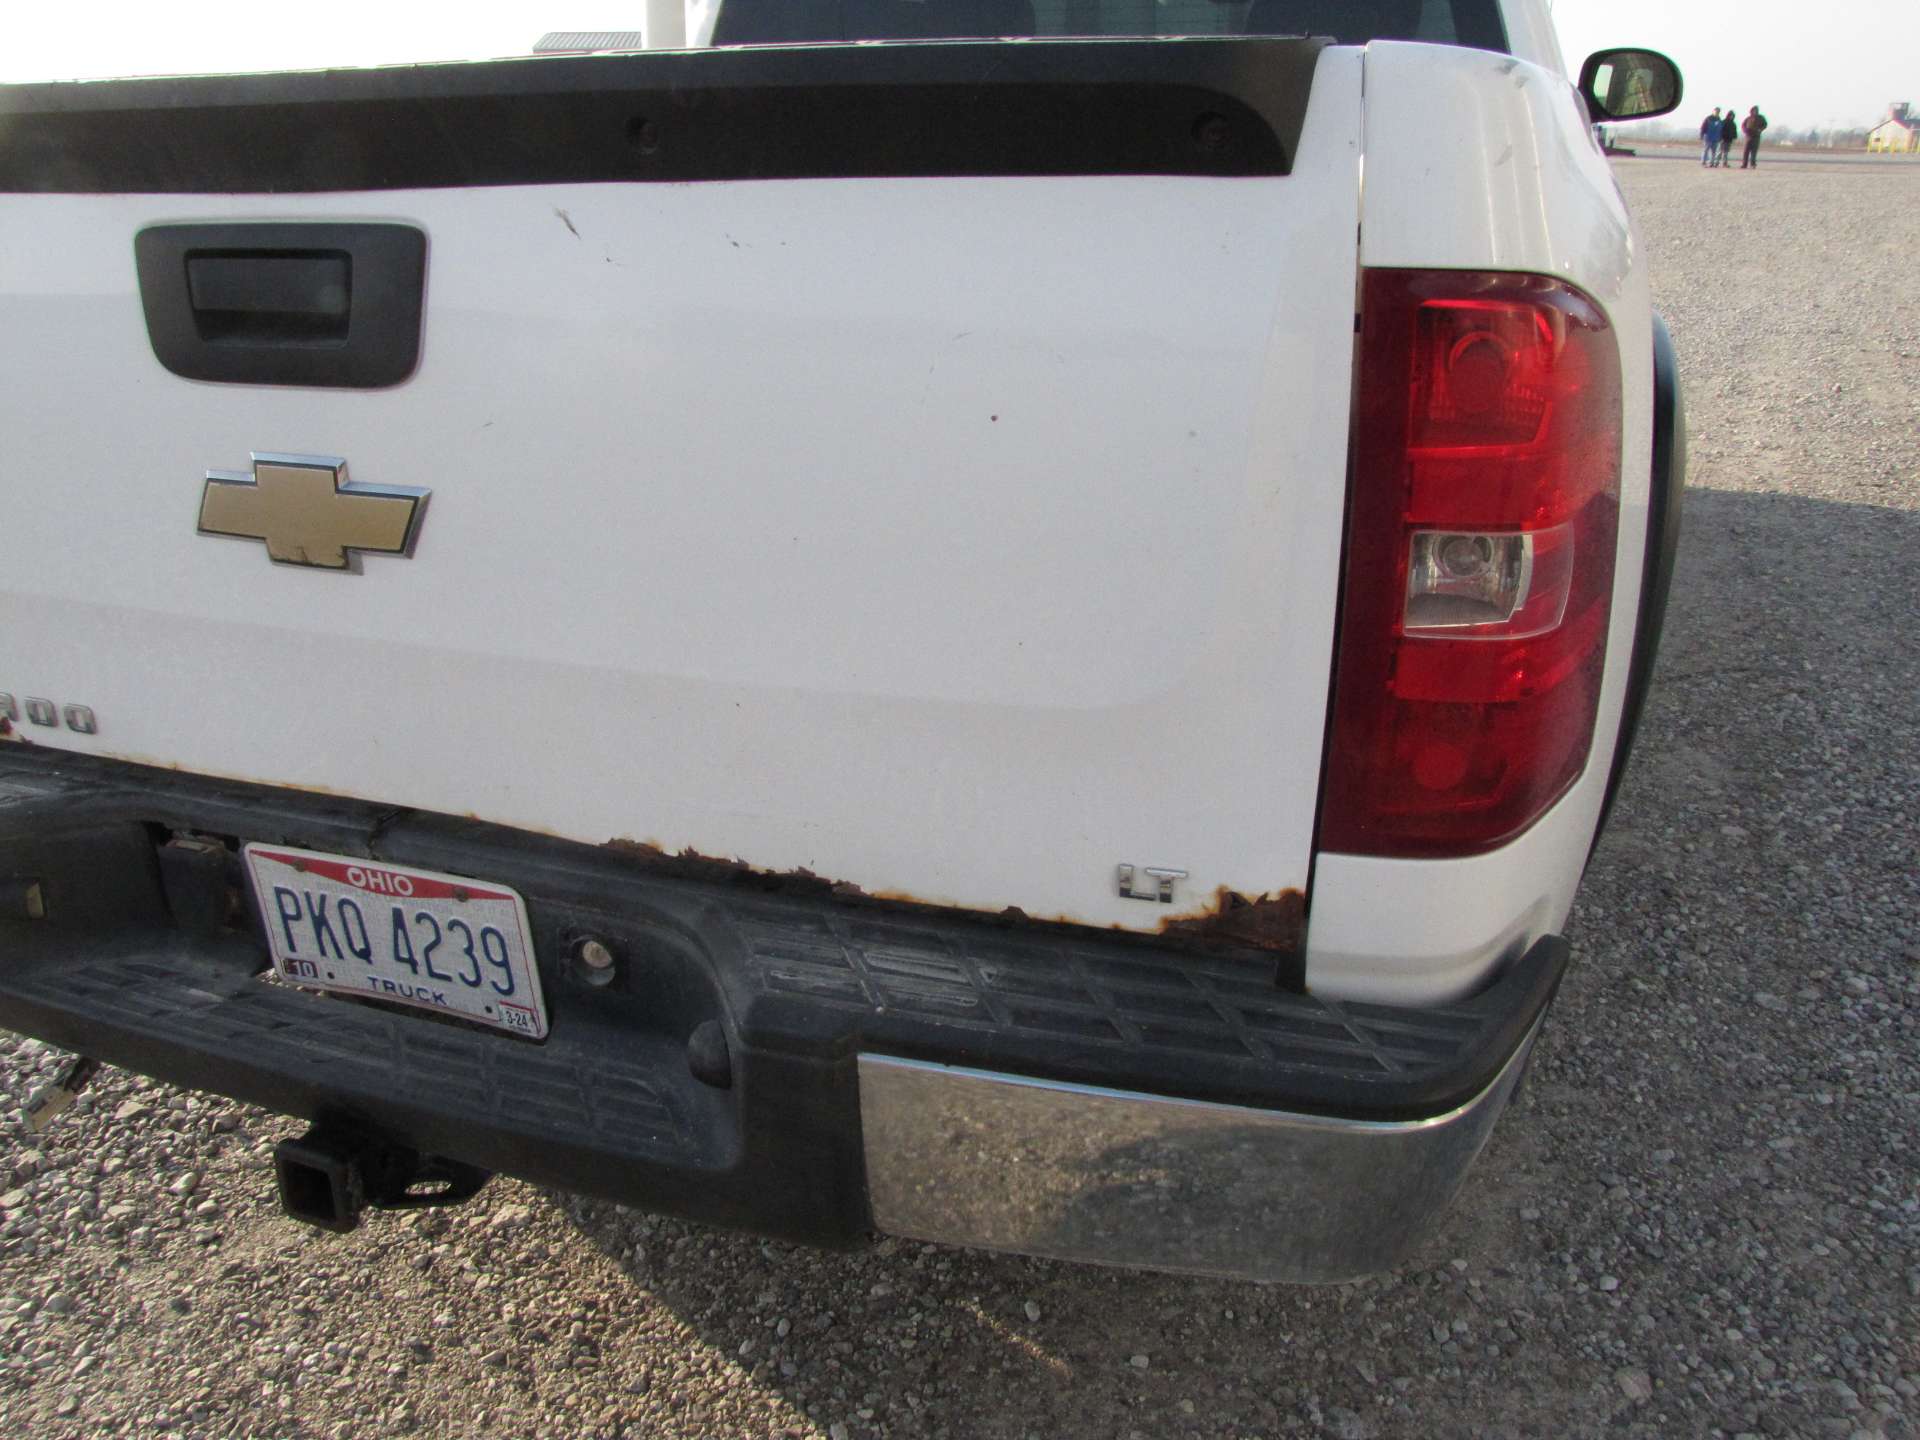 2008 Chevy Silverado 1500 LT Pickup Truck (CRACKED FRAME) - Image 24 of 43